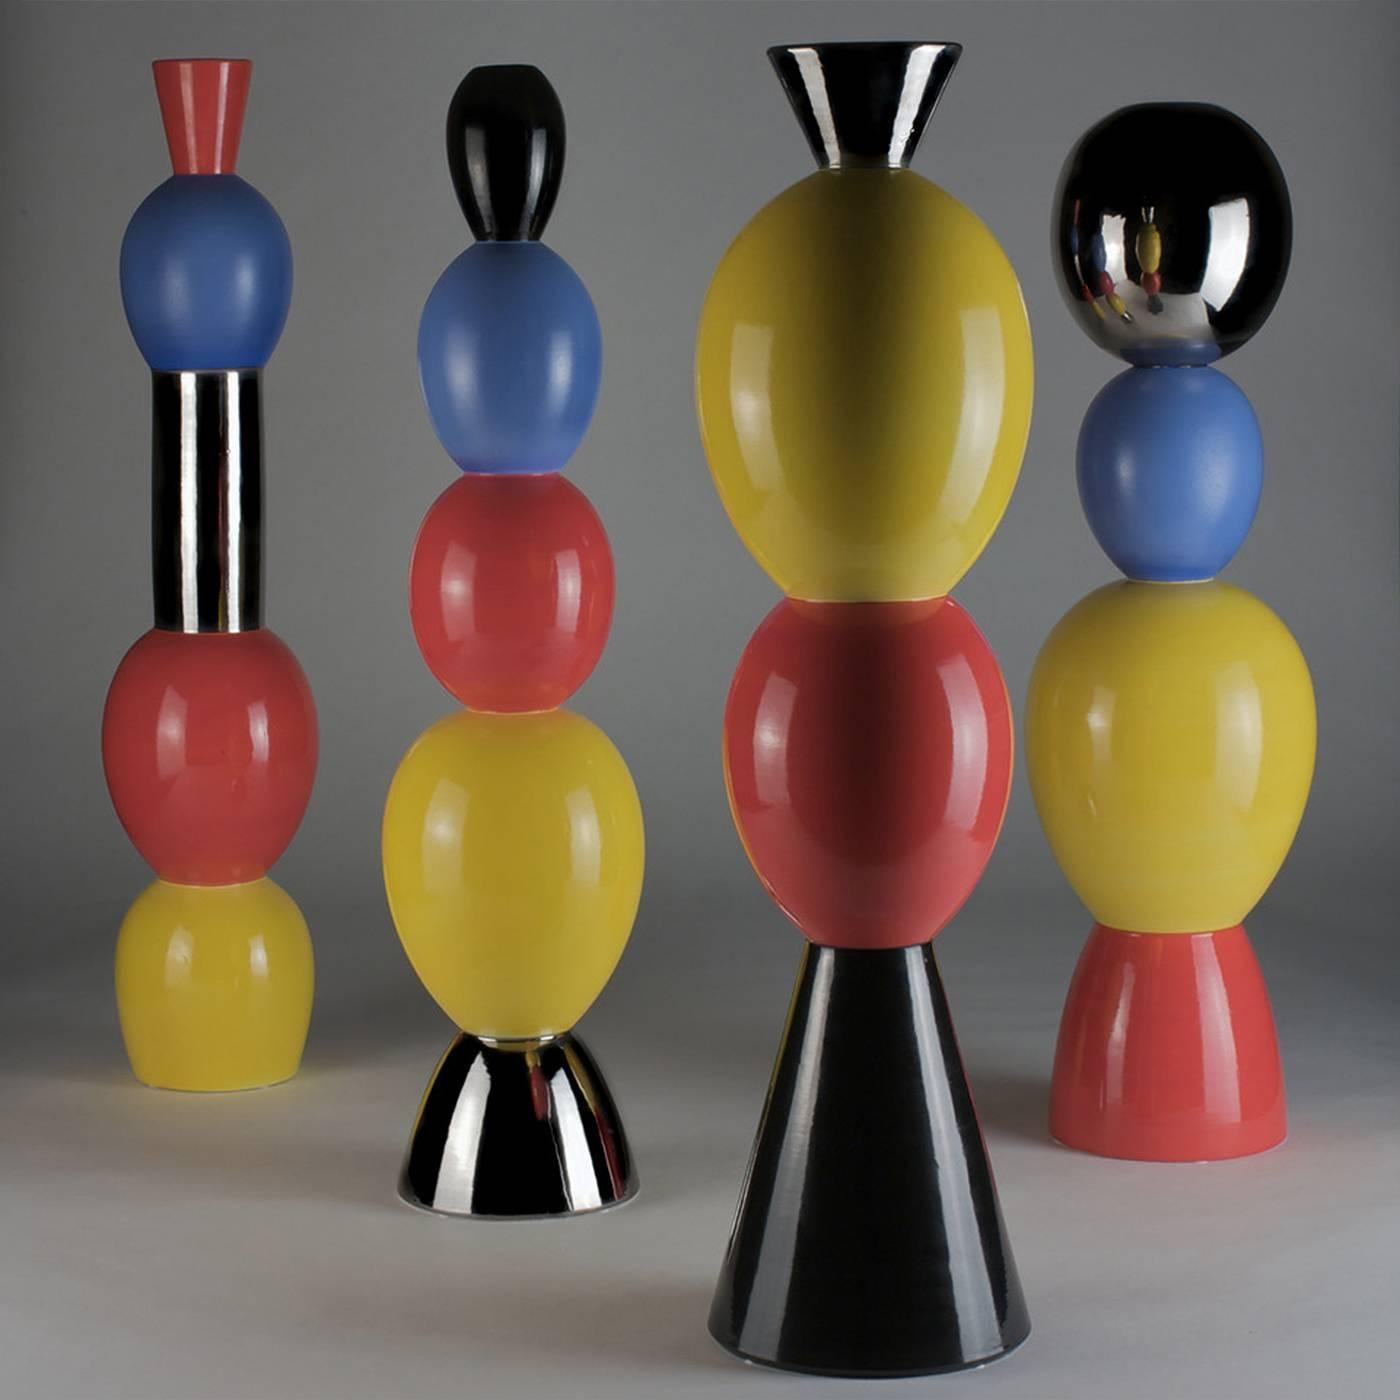 Designed by Alessandro Mendini for Superego as one of twelve abstract columns, this ceramic sculpture is part of a limited series of 50 pieces, all numbered and signed. The sinuous volumes and gentle curves that make the Silhouette of this piece are